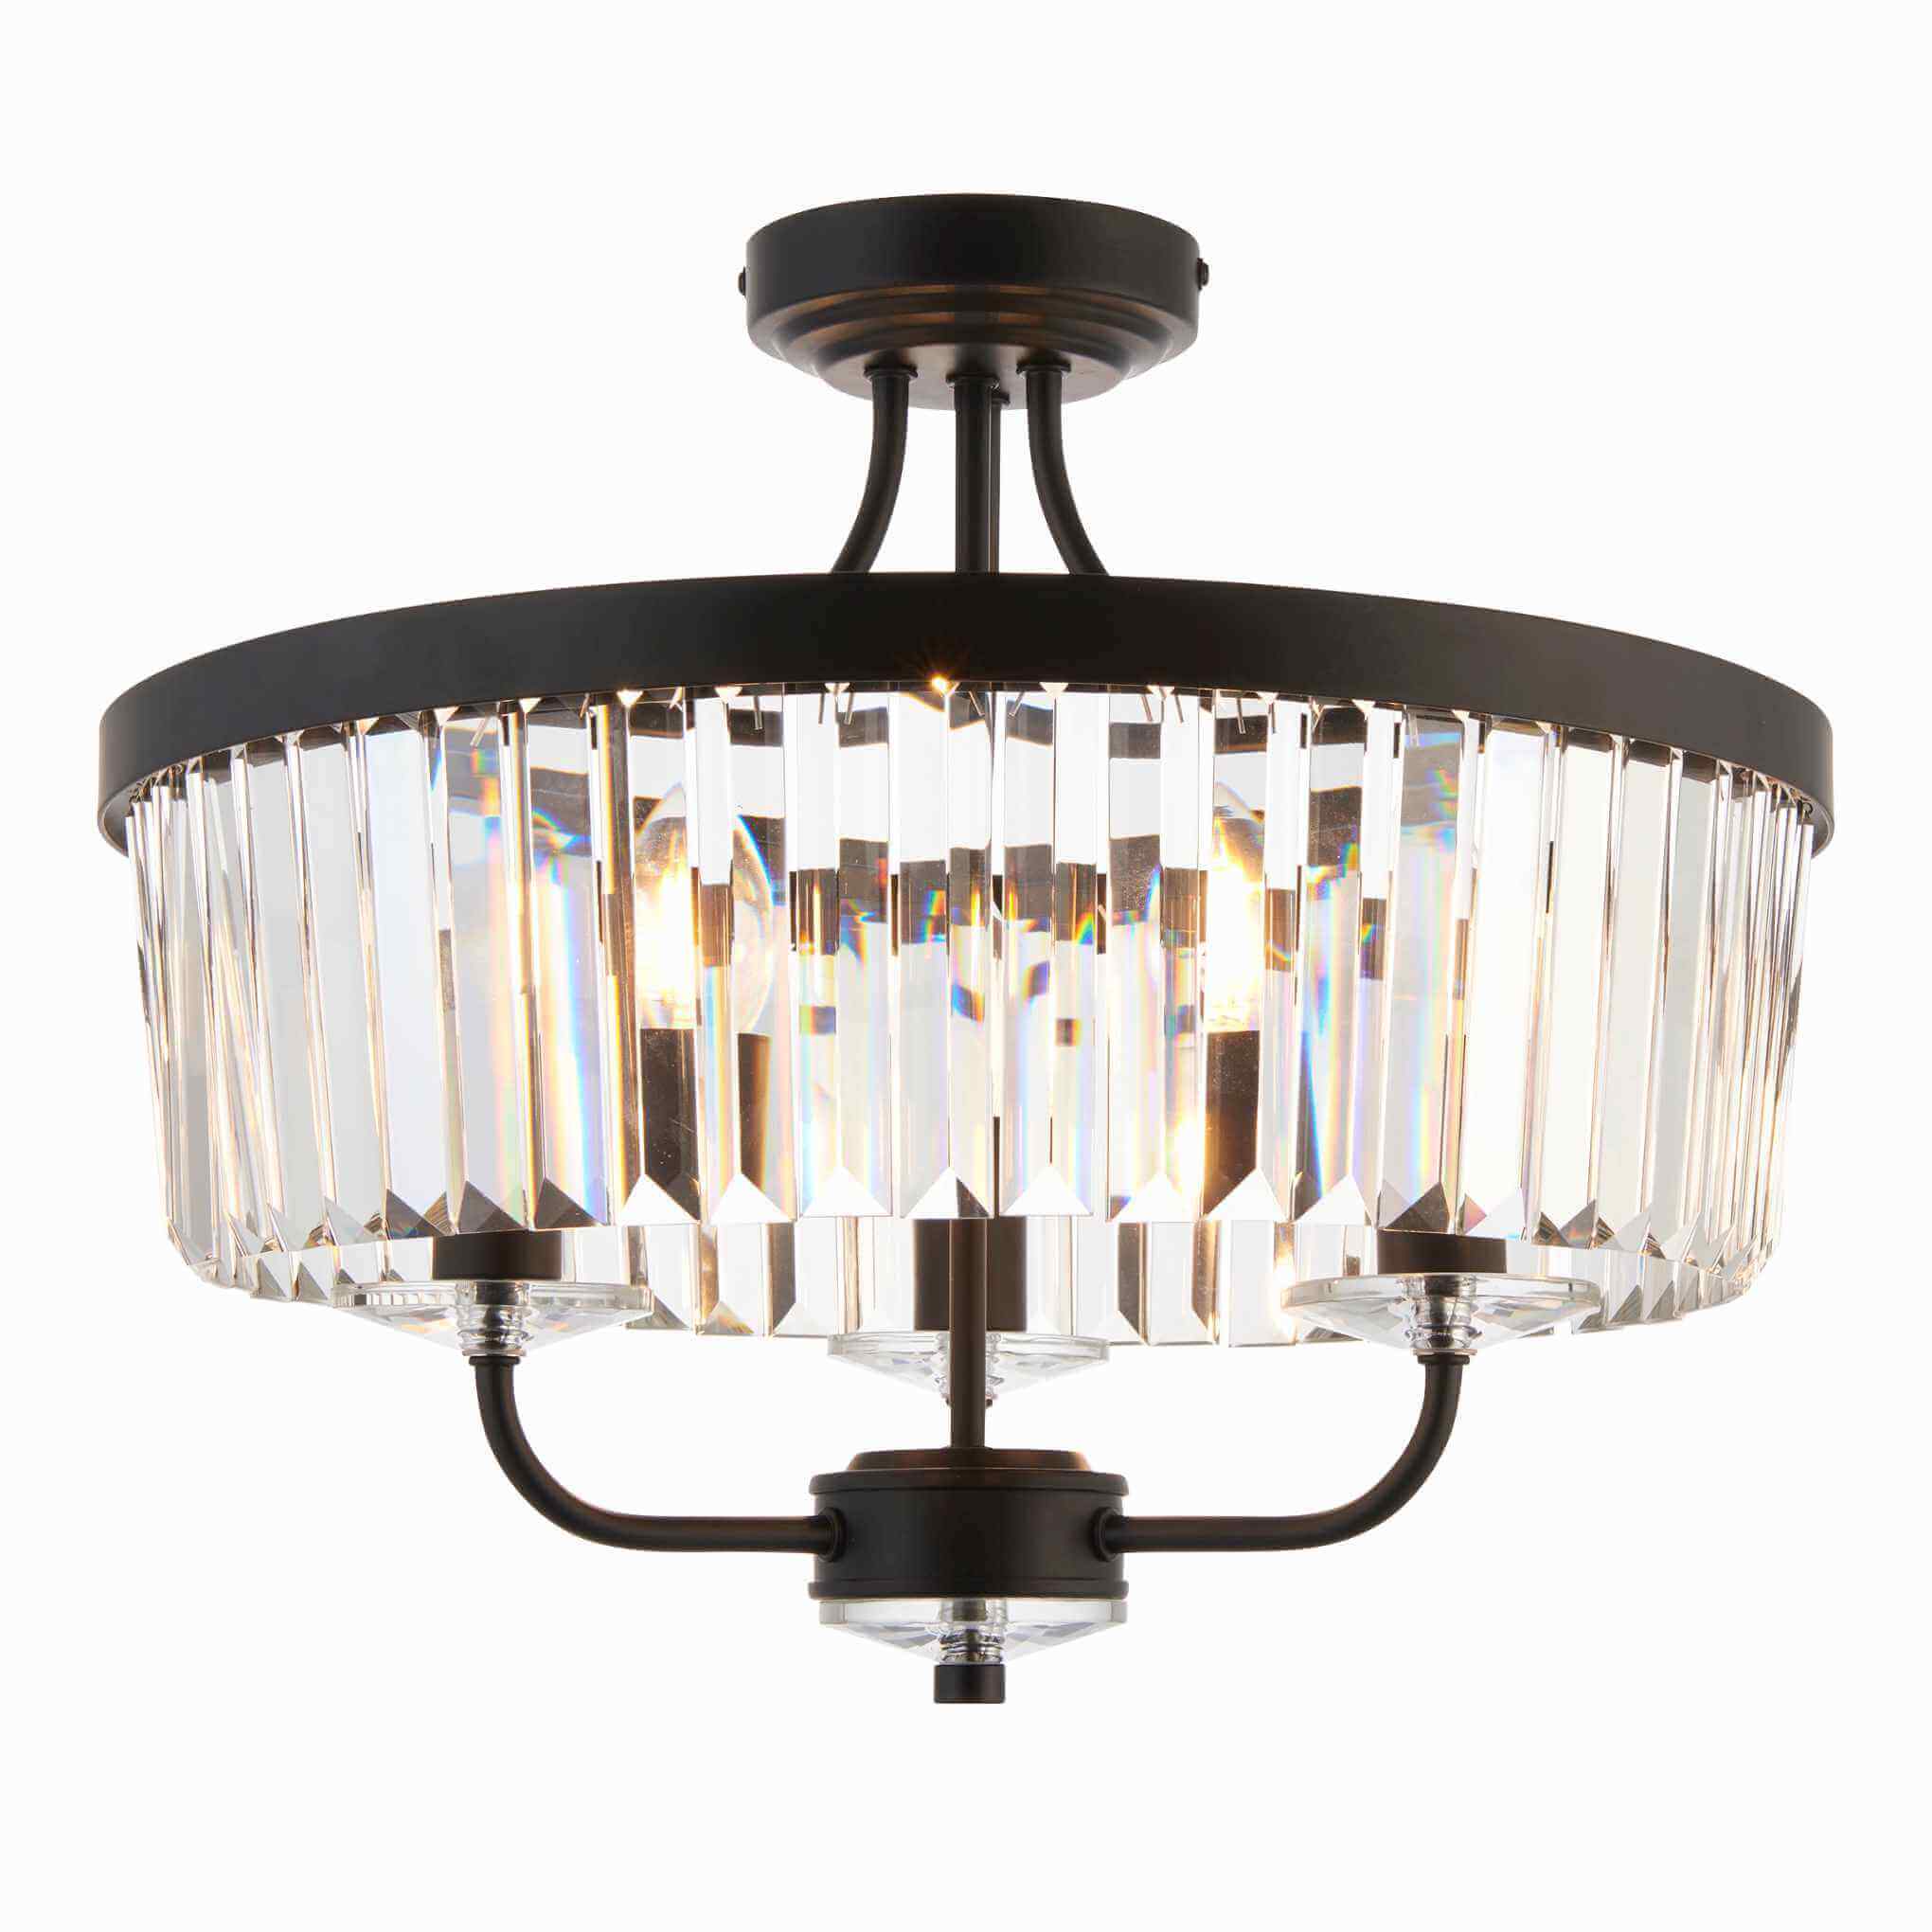 Iara Round Faceted Glass Semi-Flush Chandelier - Black - escapologyhome.co.uk